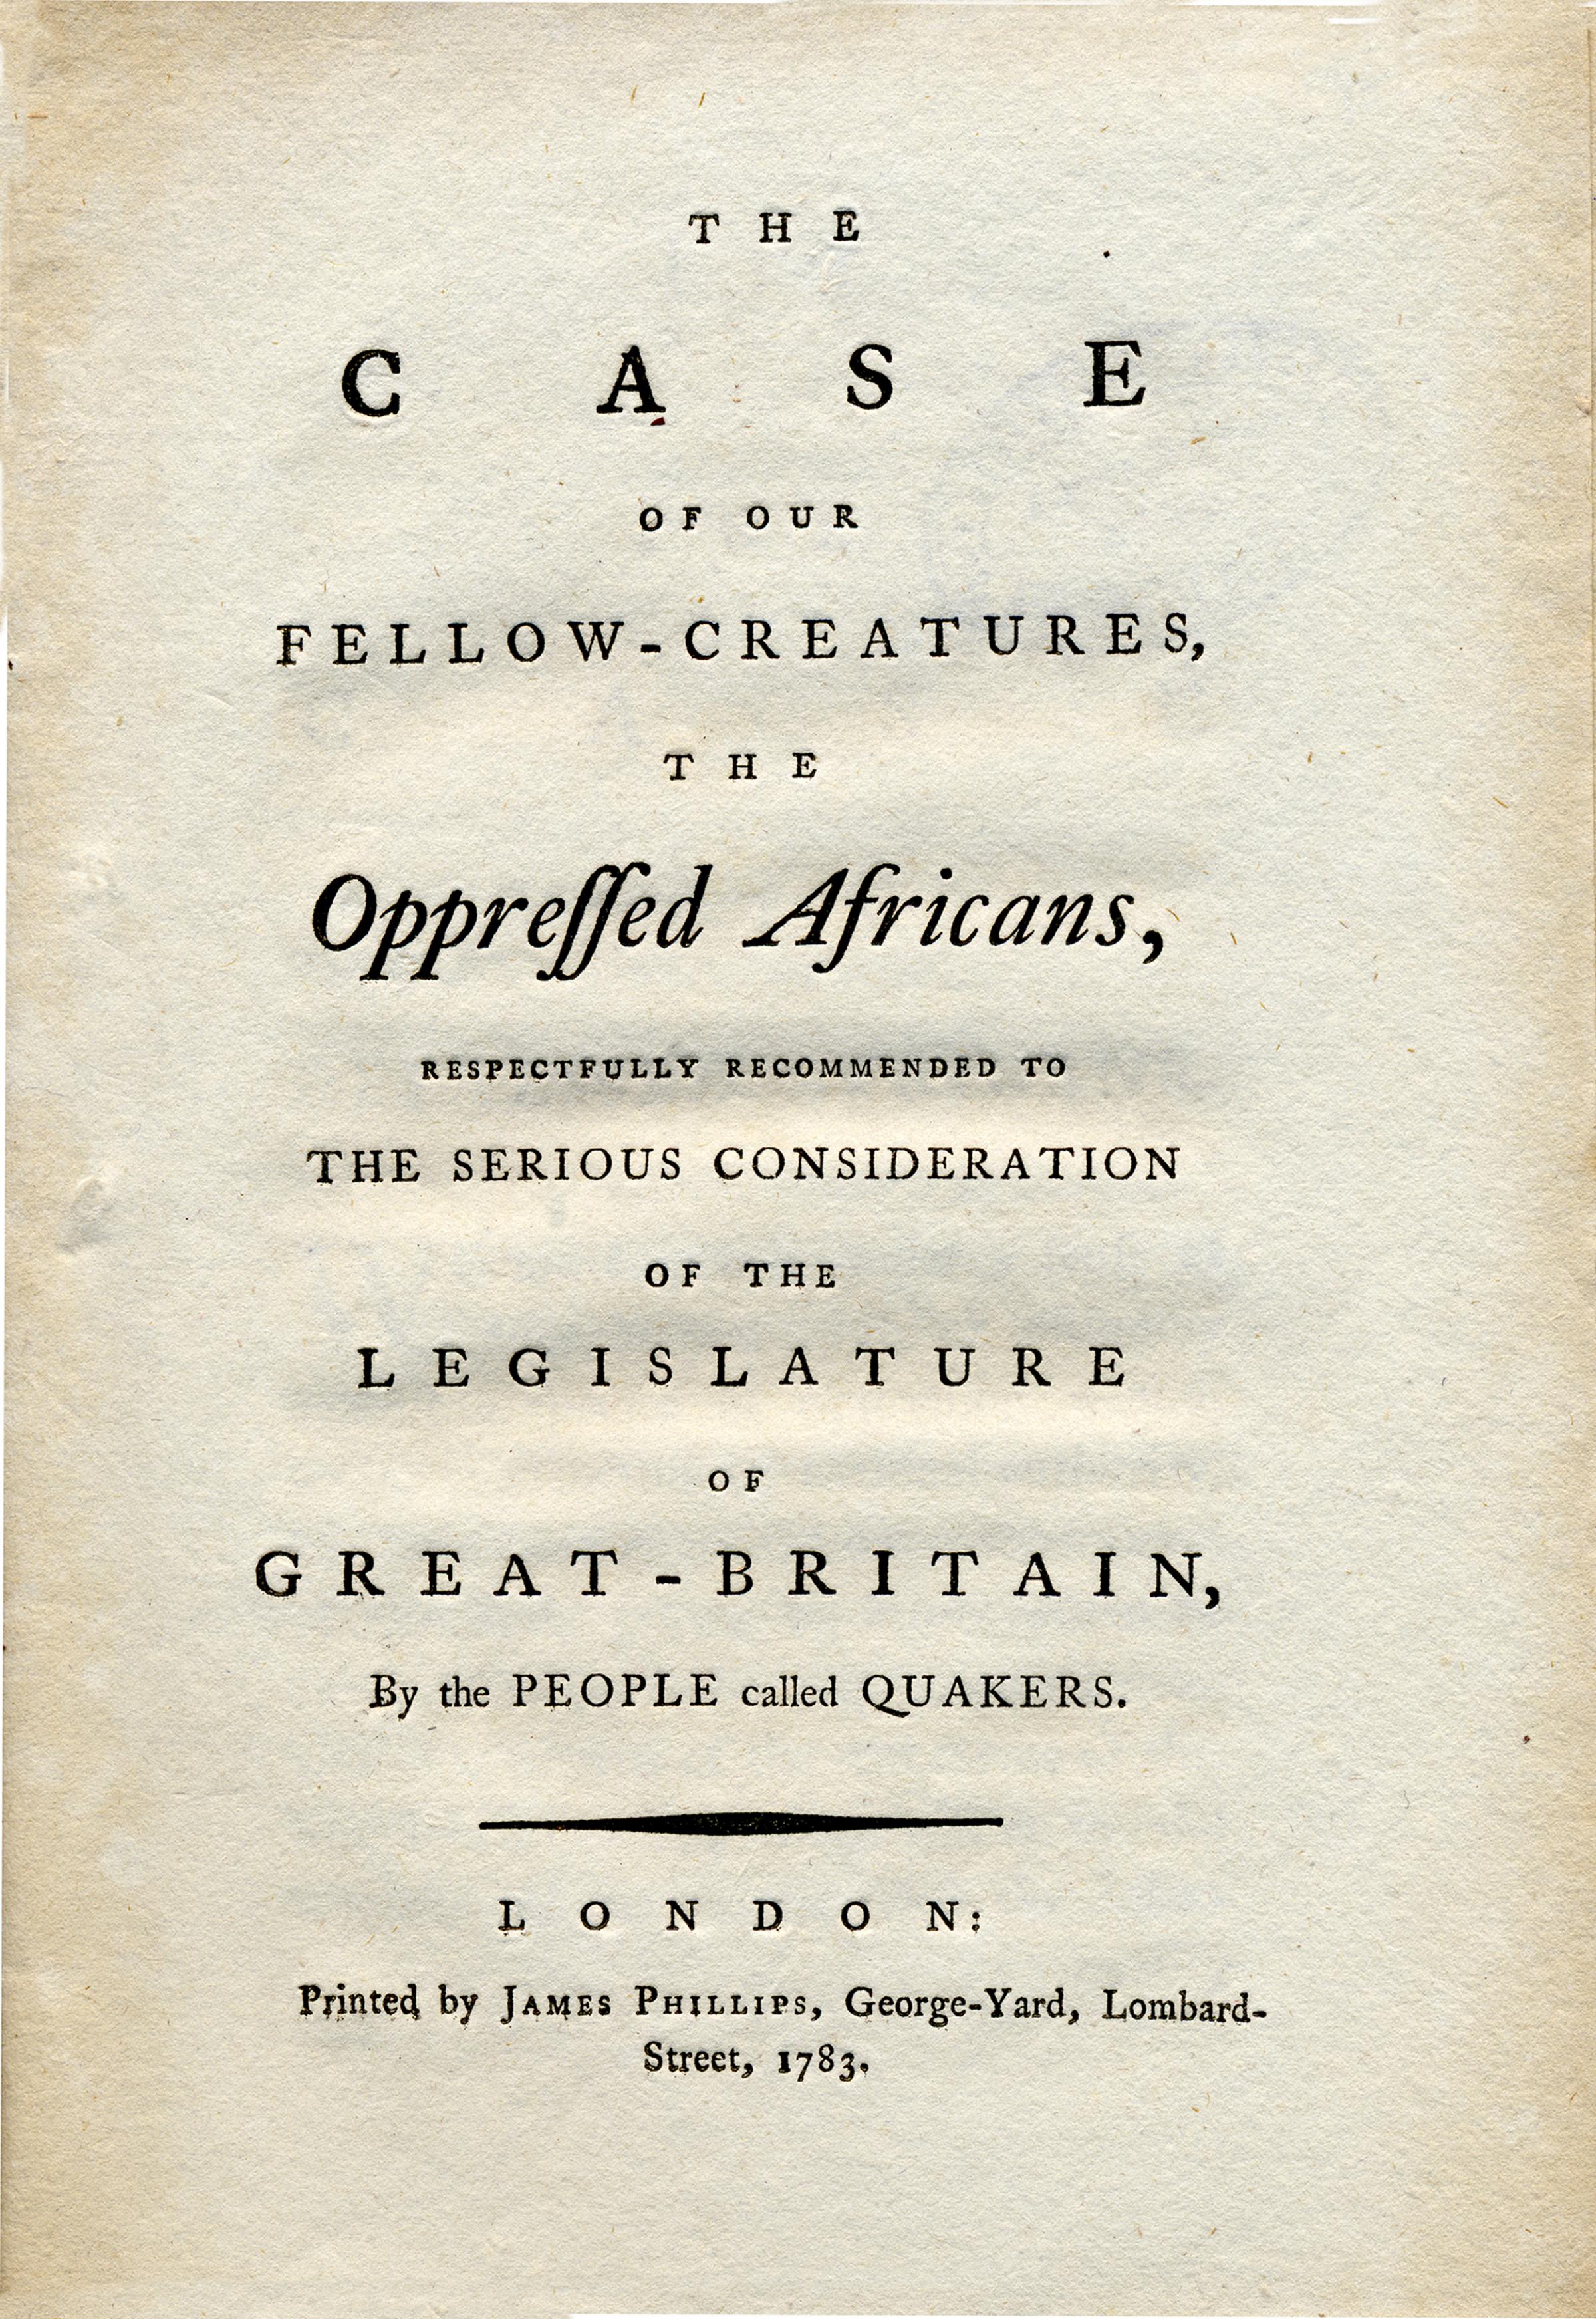 In 1783, Dillwyn co-wrote and published a tract entitled: The case of our fellow creatures, the oppressed Africans, respectfully recommended to the serious consideration of the legislature of Great Britain by the people called Quakers. Credit: Library